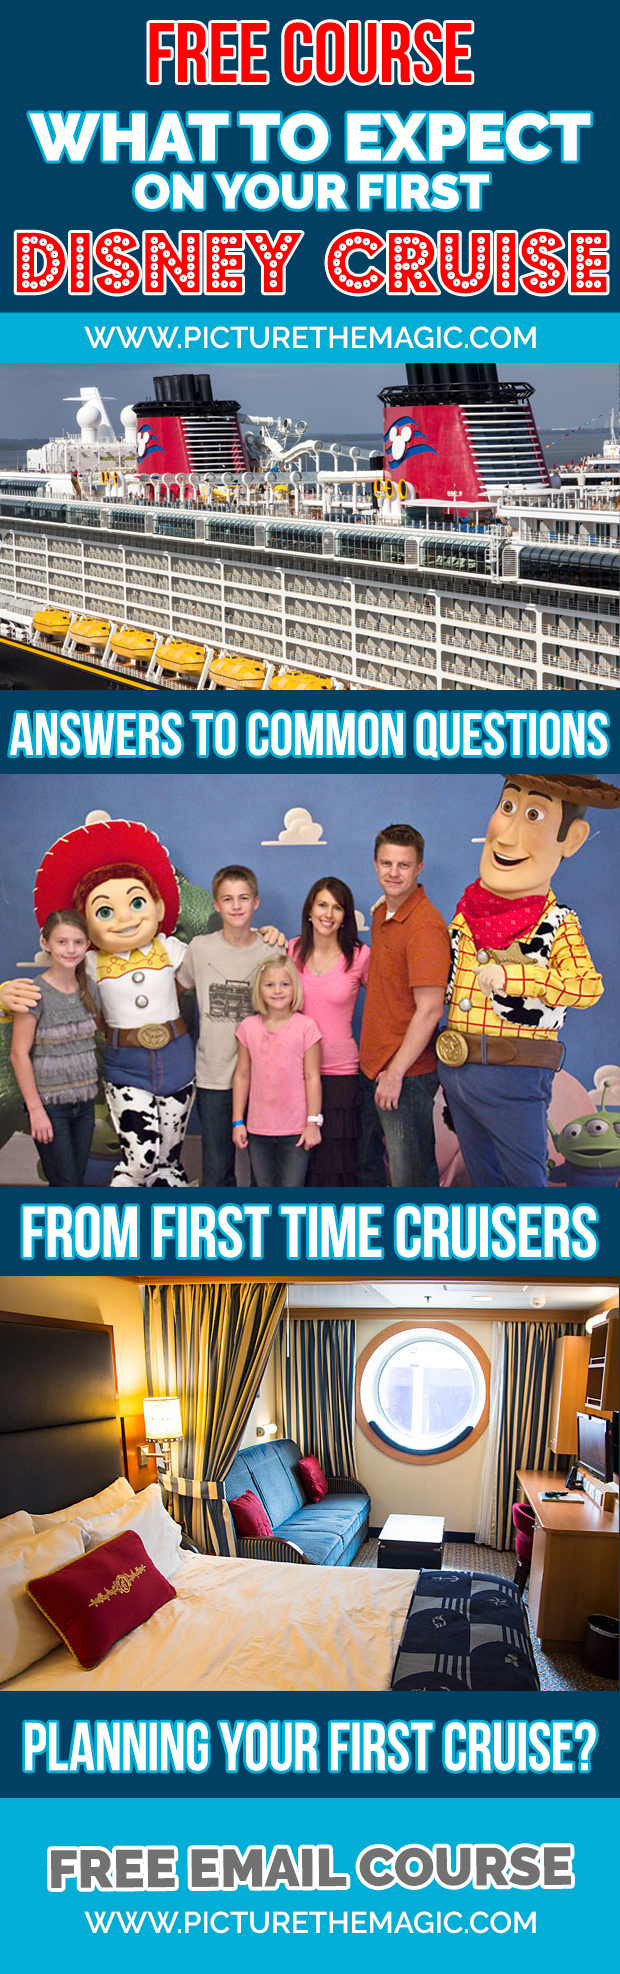 FREE COURSE: What to Expect on Your First Disney Cruise